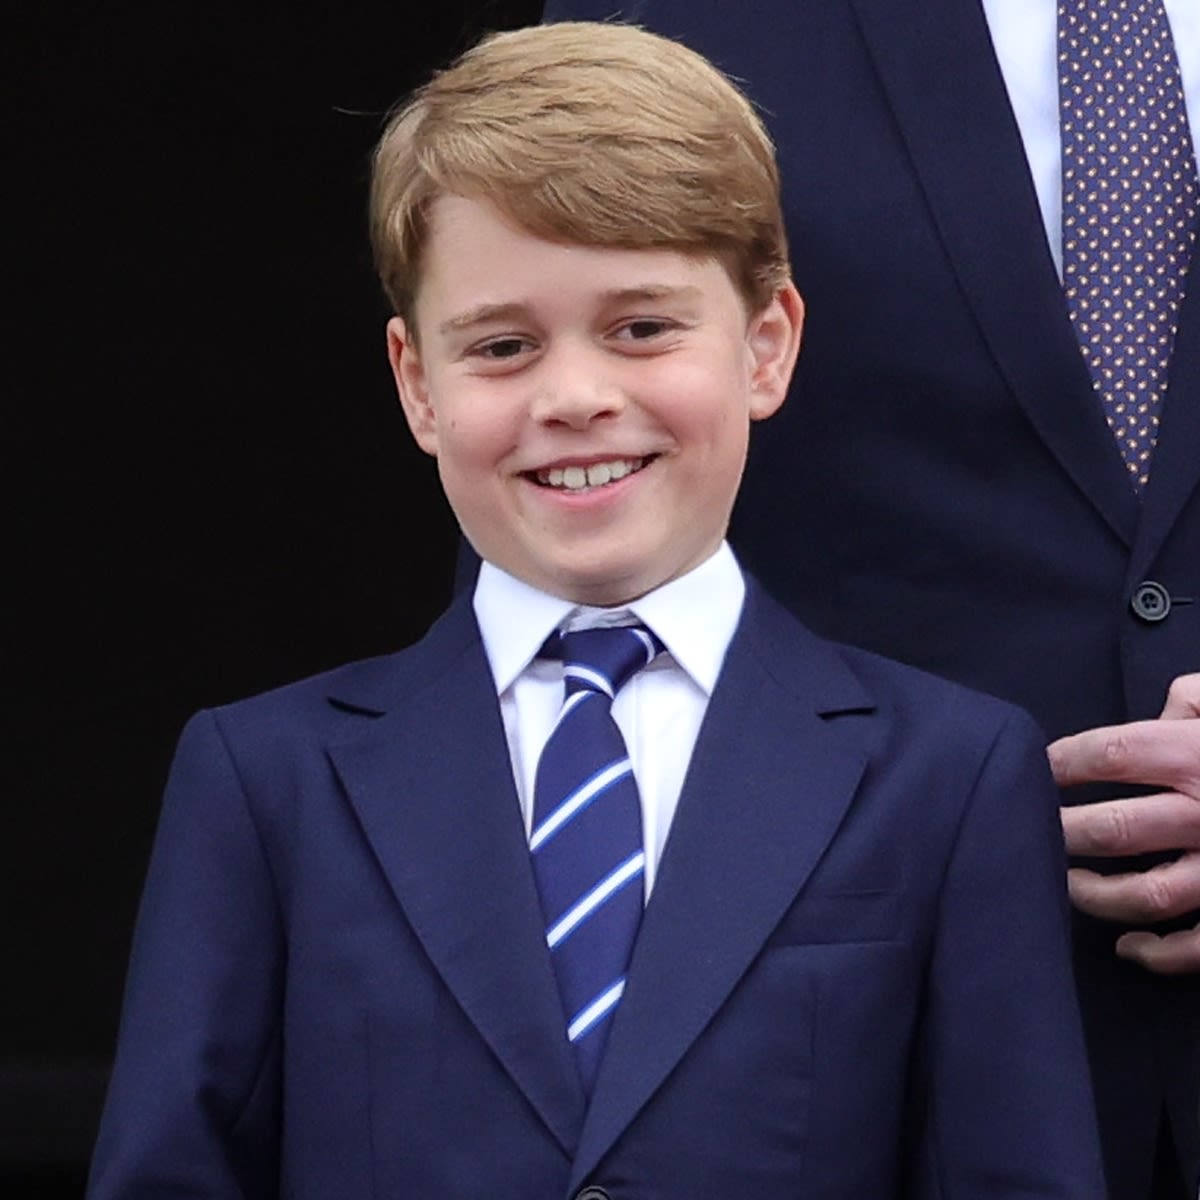 Kate Middleton Shares Royally Sweet Prince George Pic on 11th Birthday